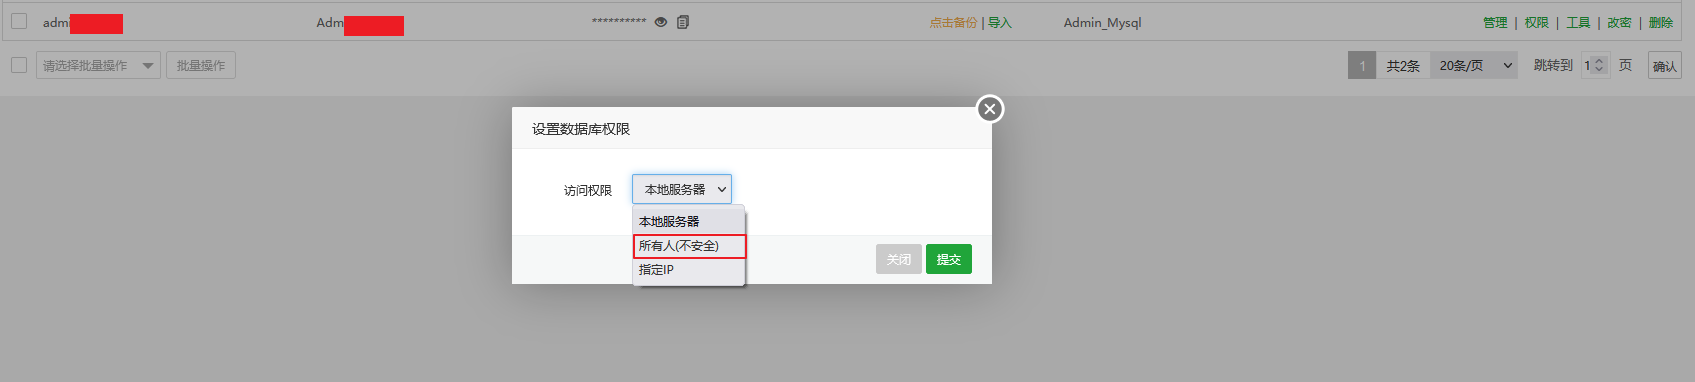 Node.js 链接 Mysql 报错解决：ER_HOST_NOT_PRIVILEGED: Host ‘*.*.*.*’ is not allowed to connect to this MySQL server插图1